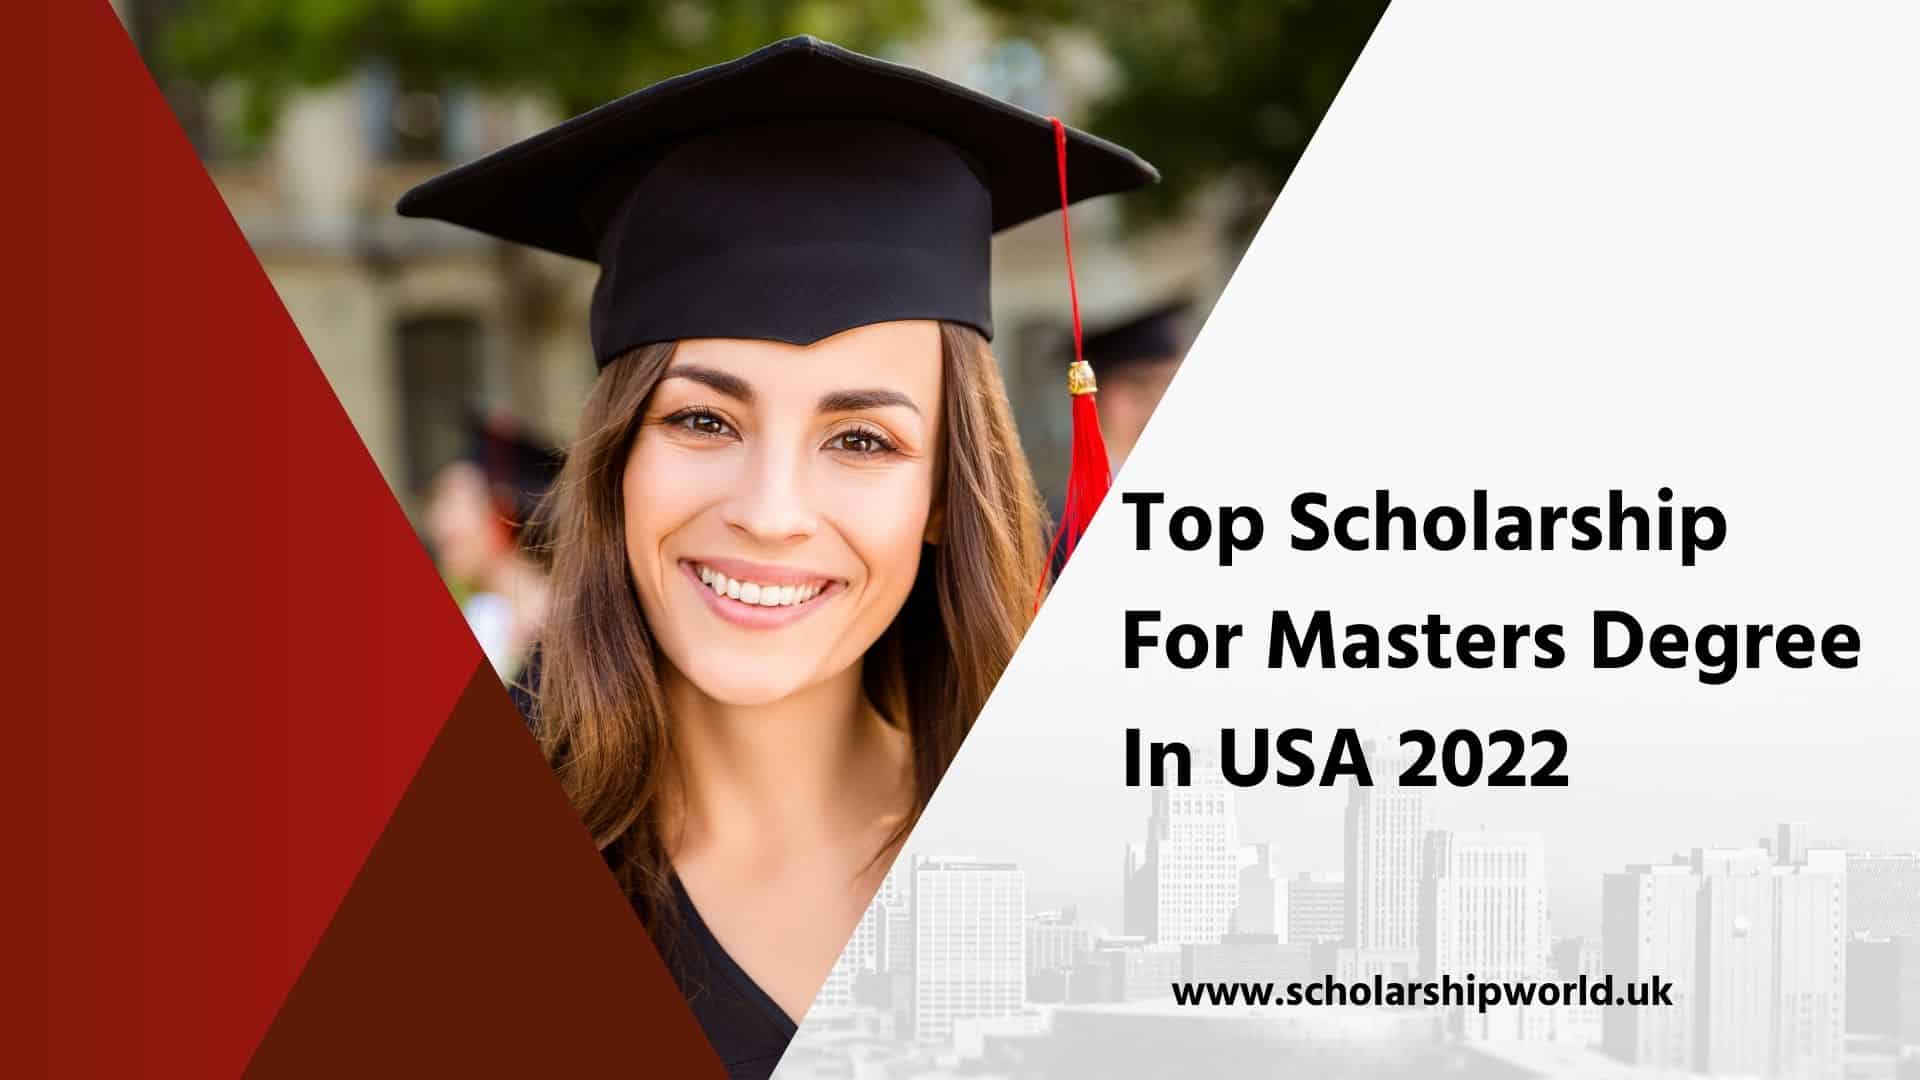 Top Scholarship For Masters Degree In USA 2022